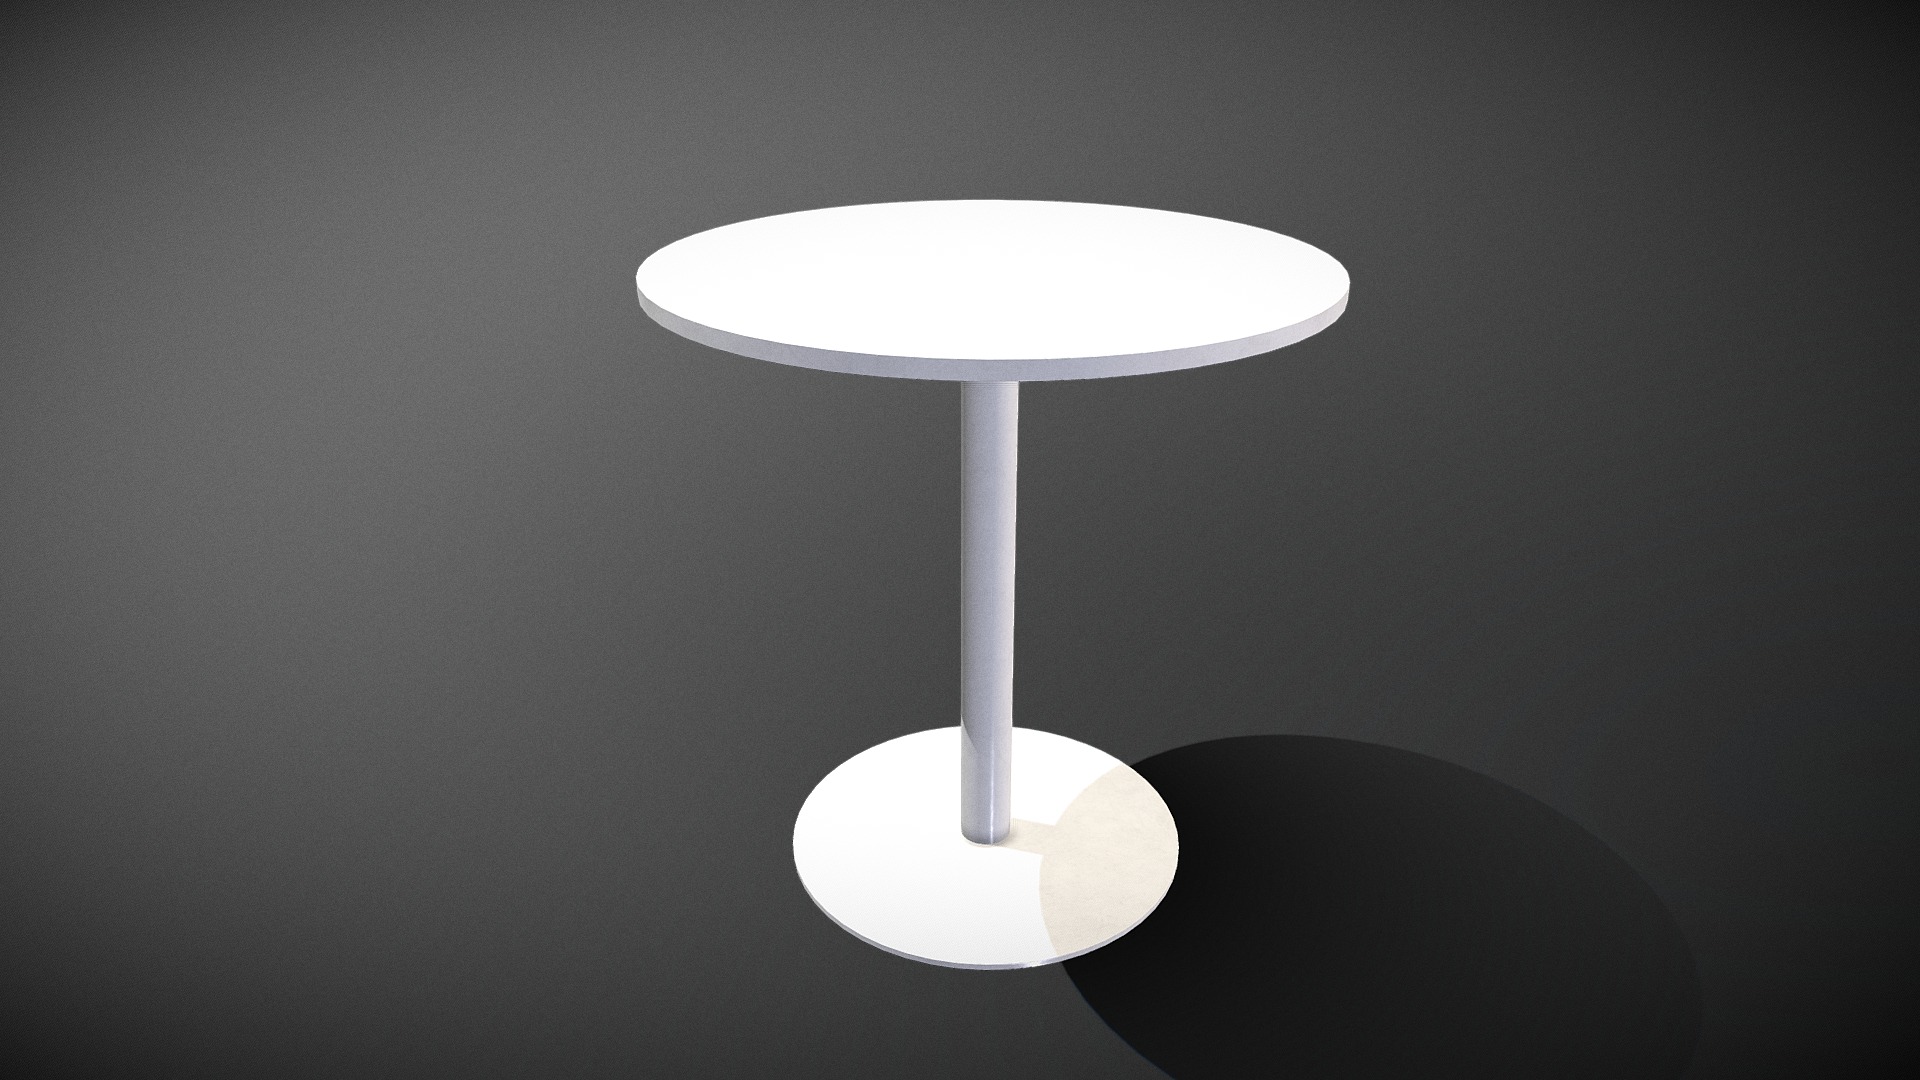 3D model Mesa Café Table – Model 4670 V-02 - This is a 3D model of the Mesa Café Table - Model 4670 V-02. The 3D model is about a lamp on a table.